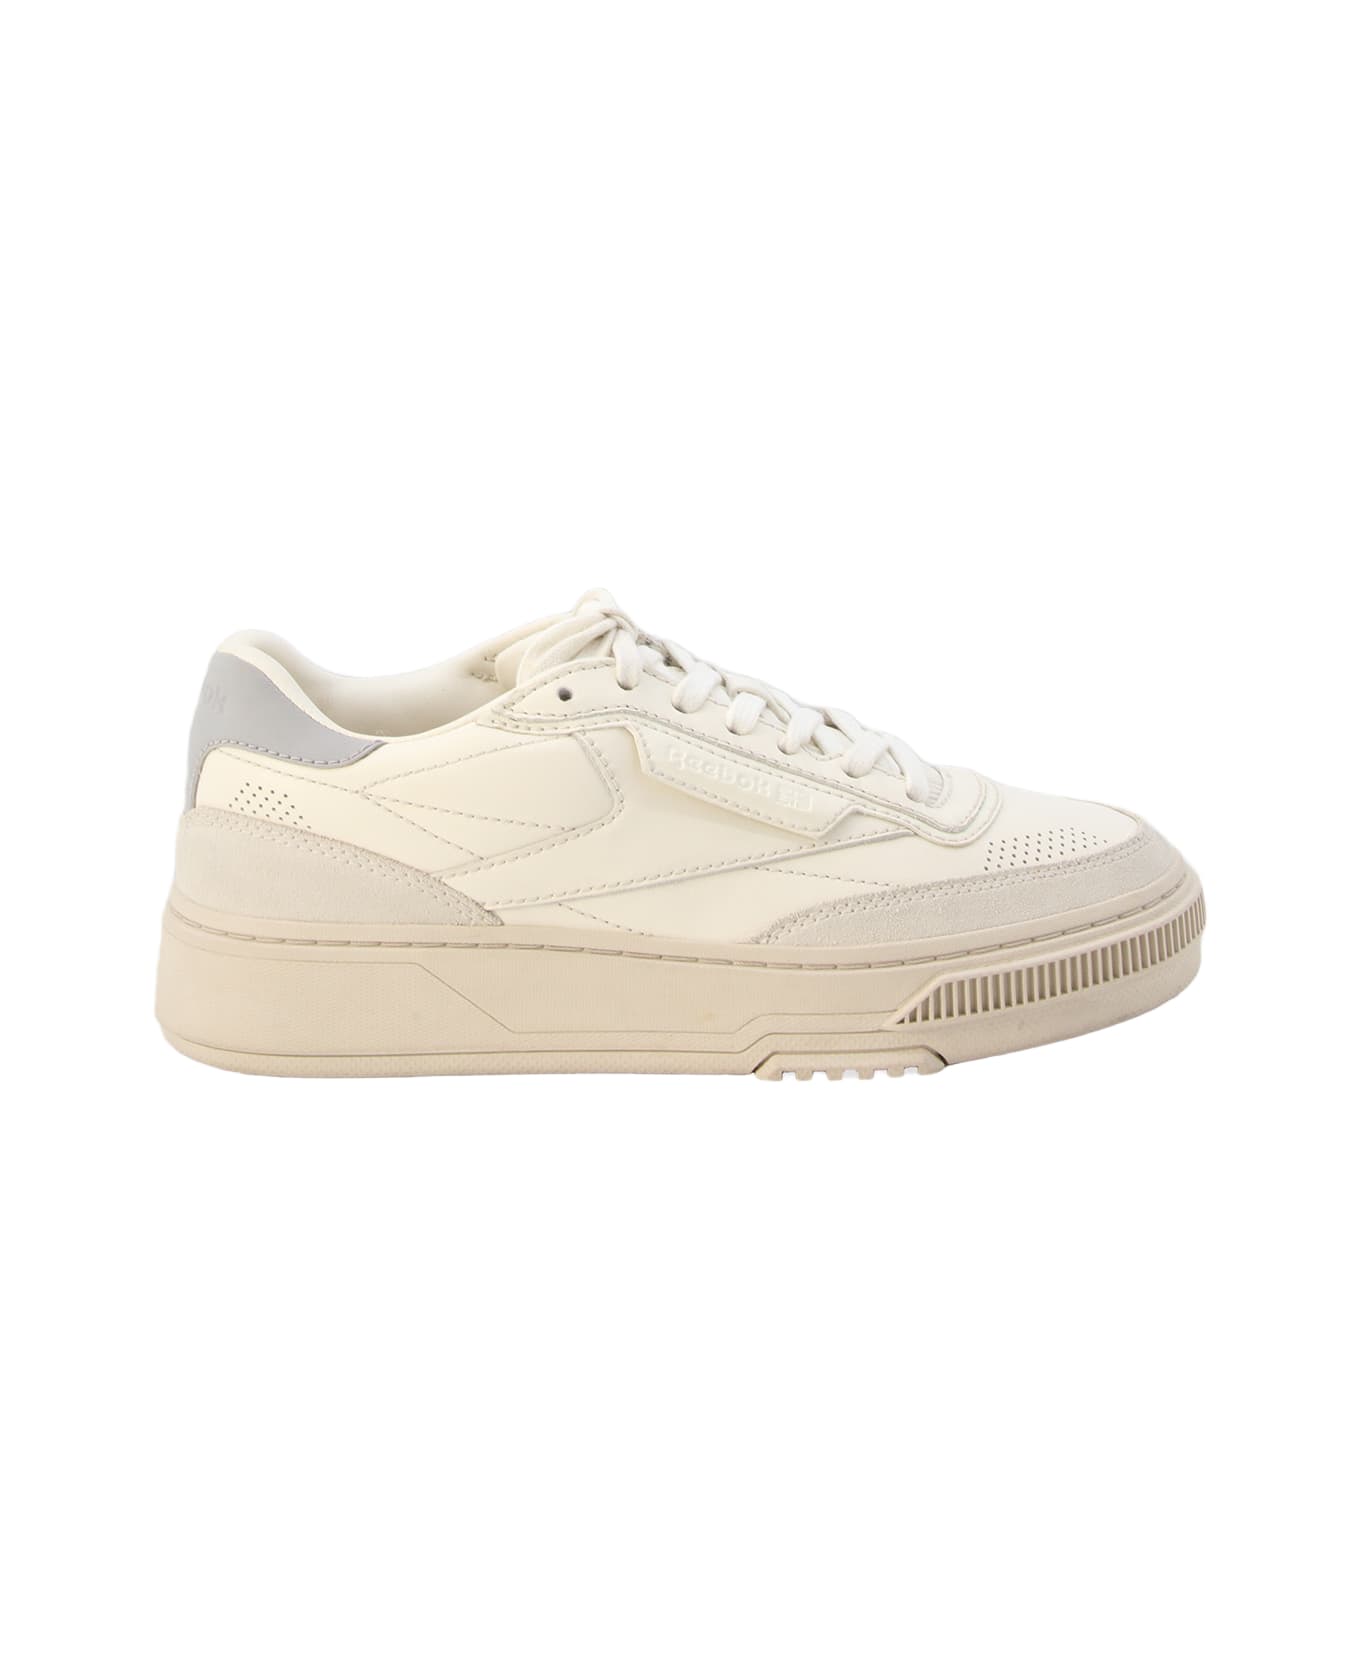 Reebok White And Grey Leather C Ltd Sneakers - White スニーカー